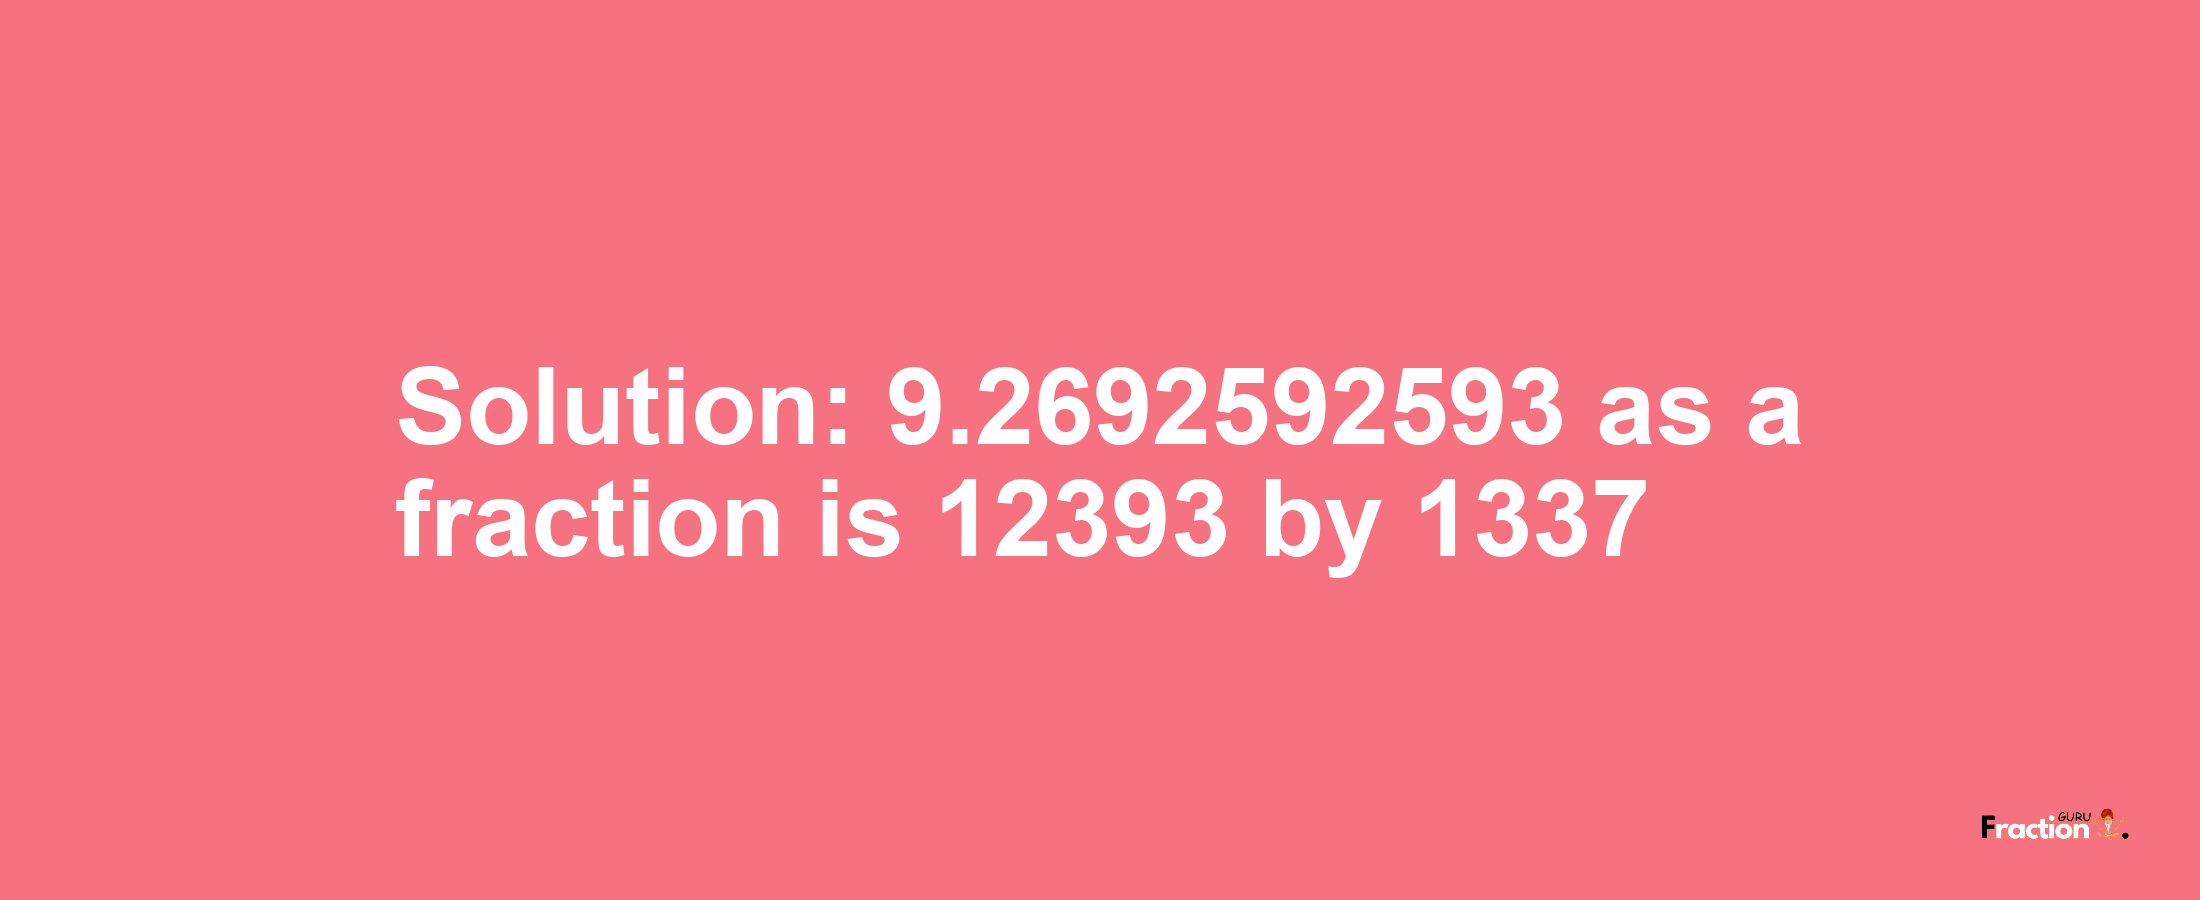 Solution:9.2692592593 as a fraction is 12393/1337